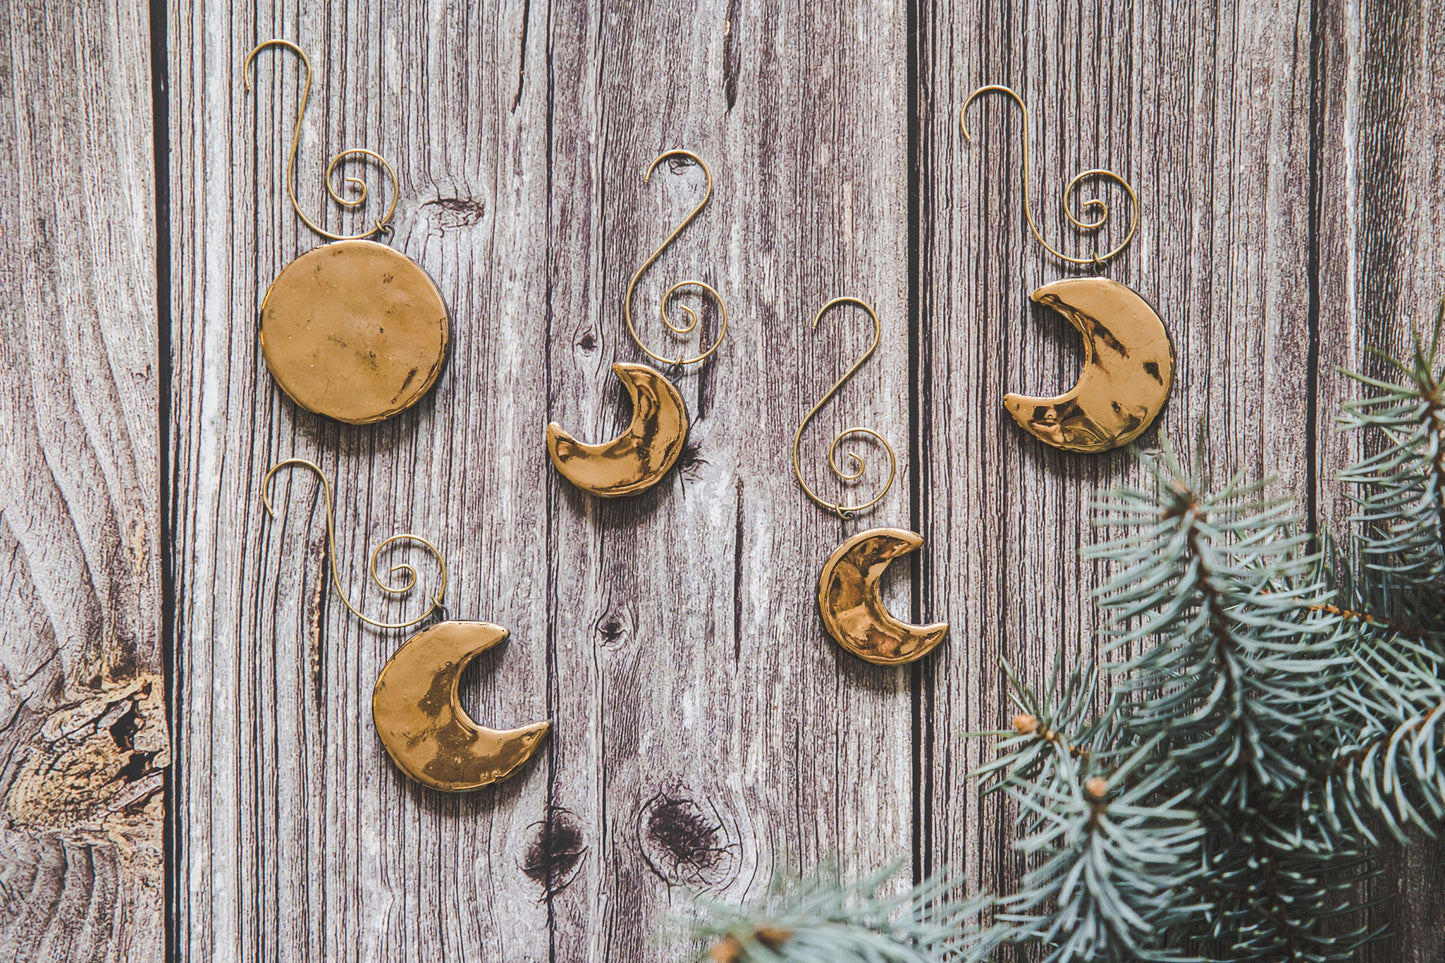 Gold plated ceramic moon phases Christmas ornament set of five - Full moon, young moon, old moon, Lunar Christmas decoration gift